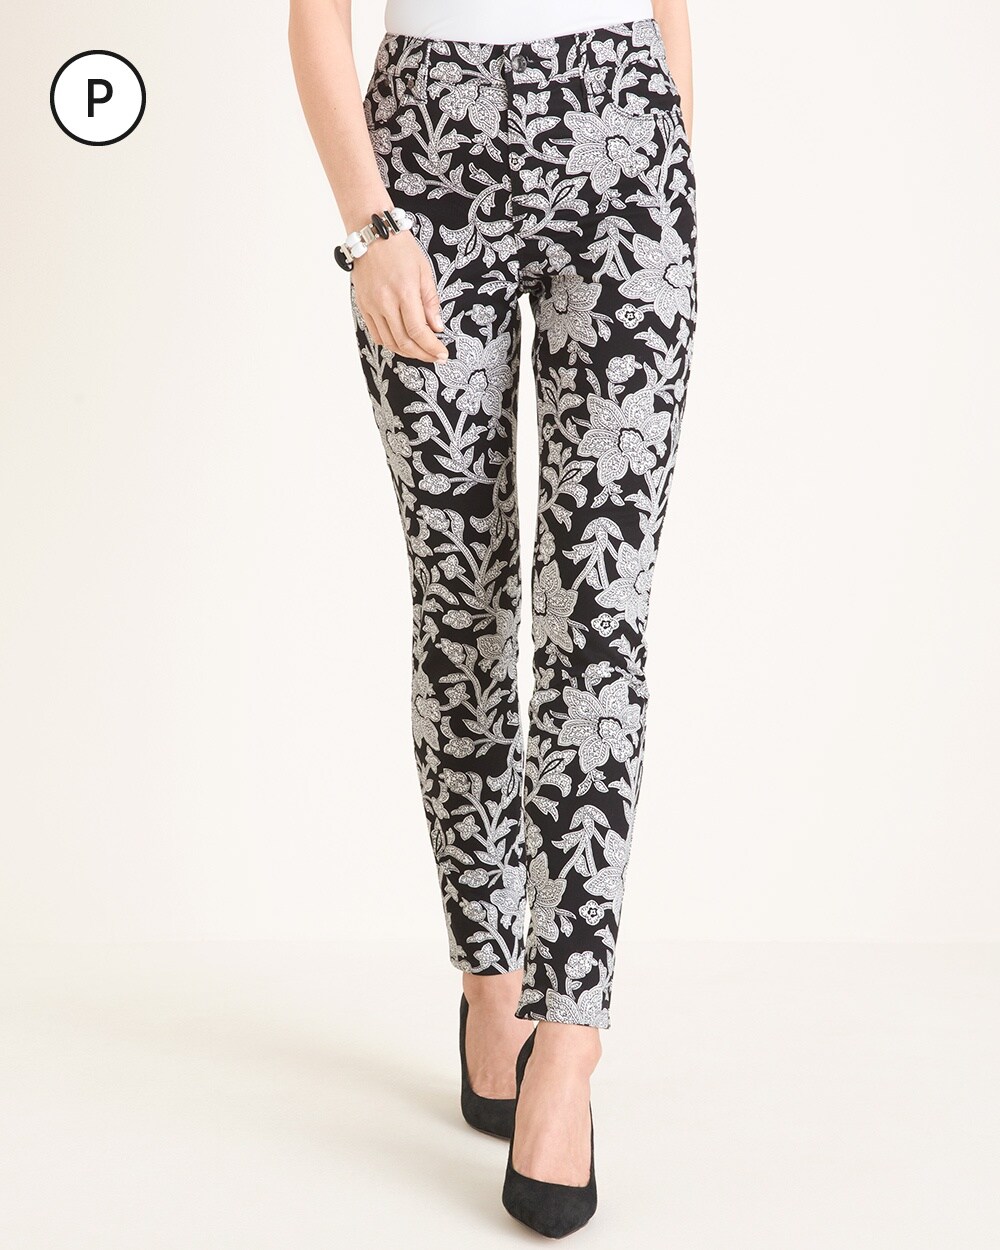 Petite Black and White Floral Jeggings